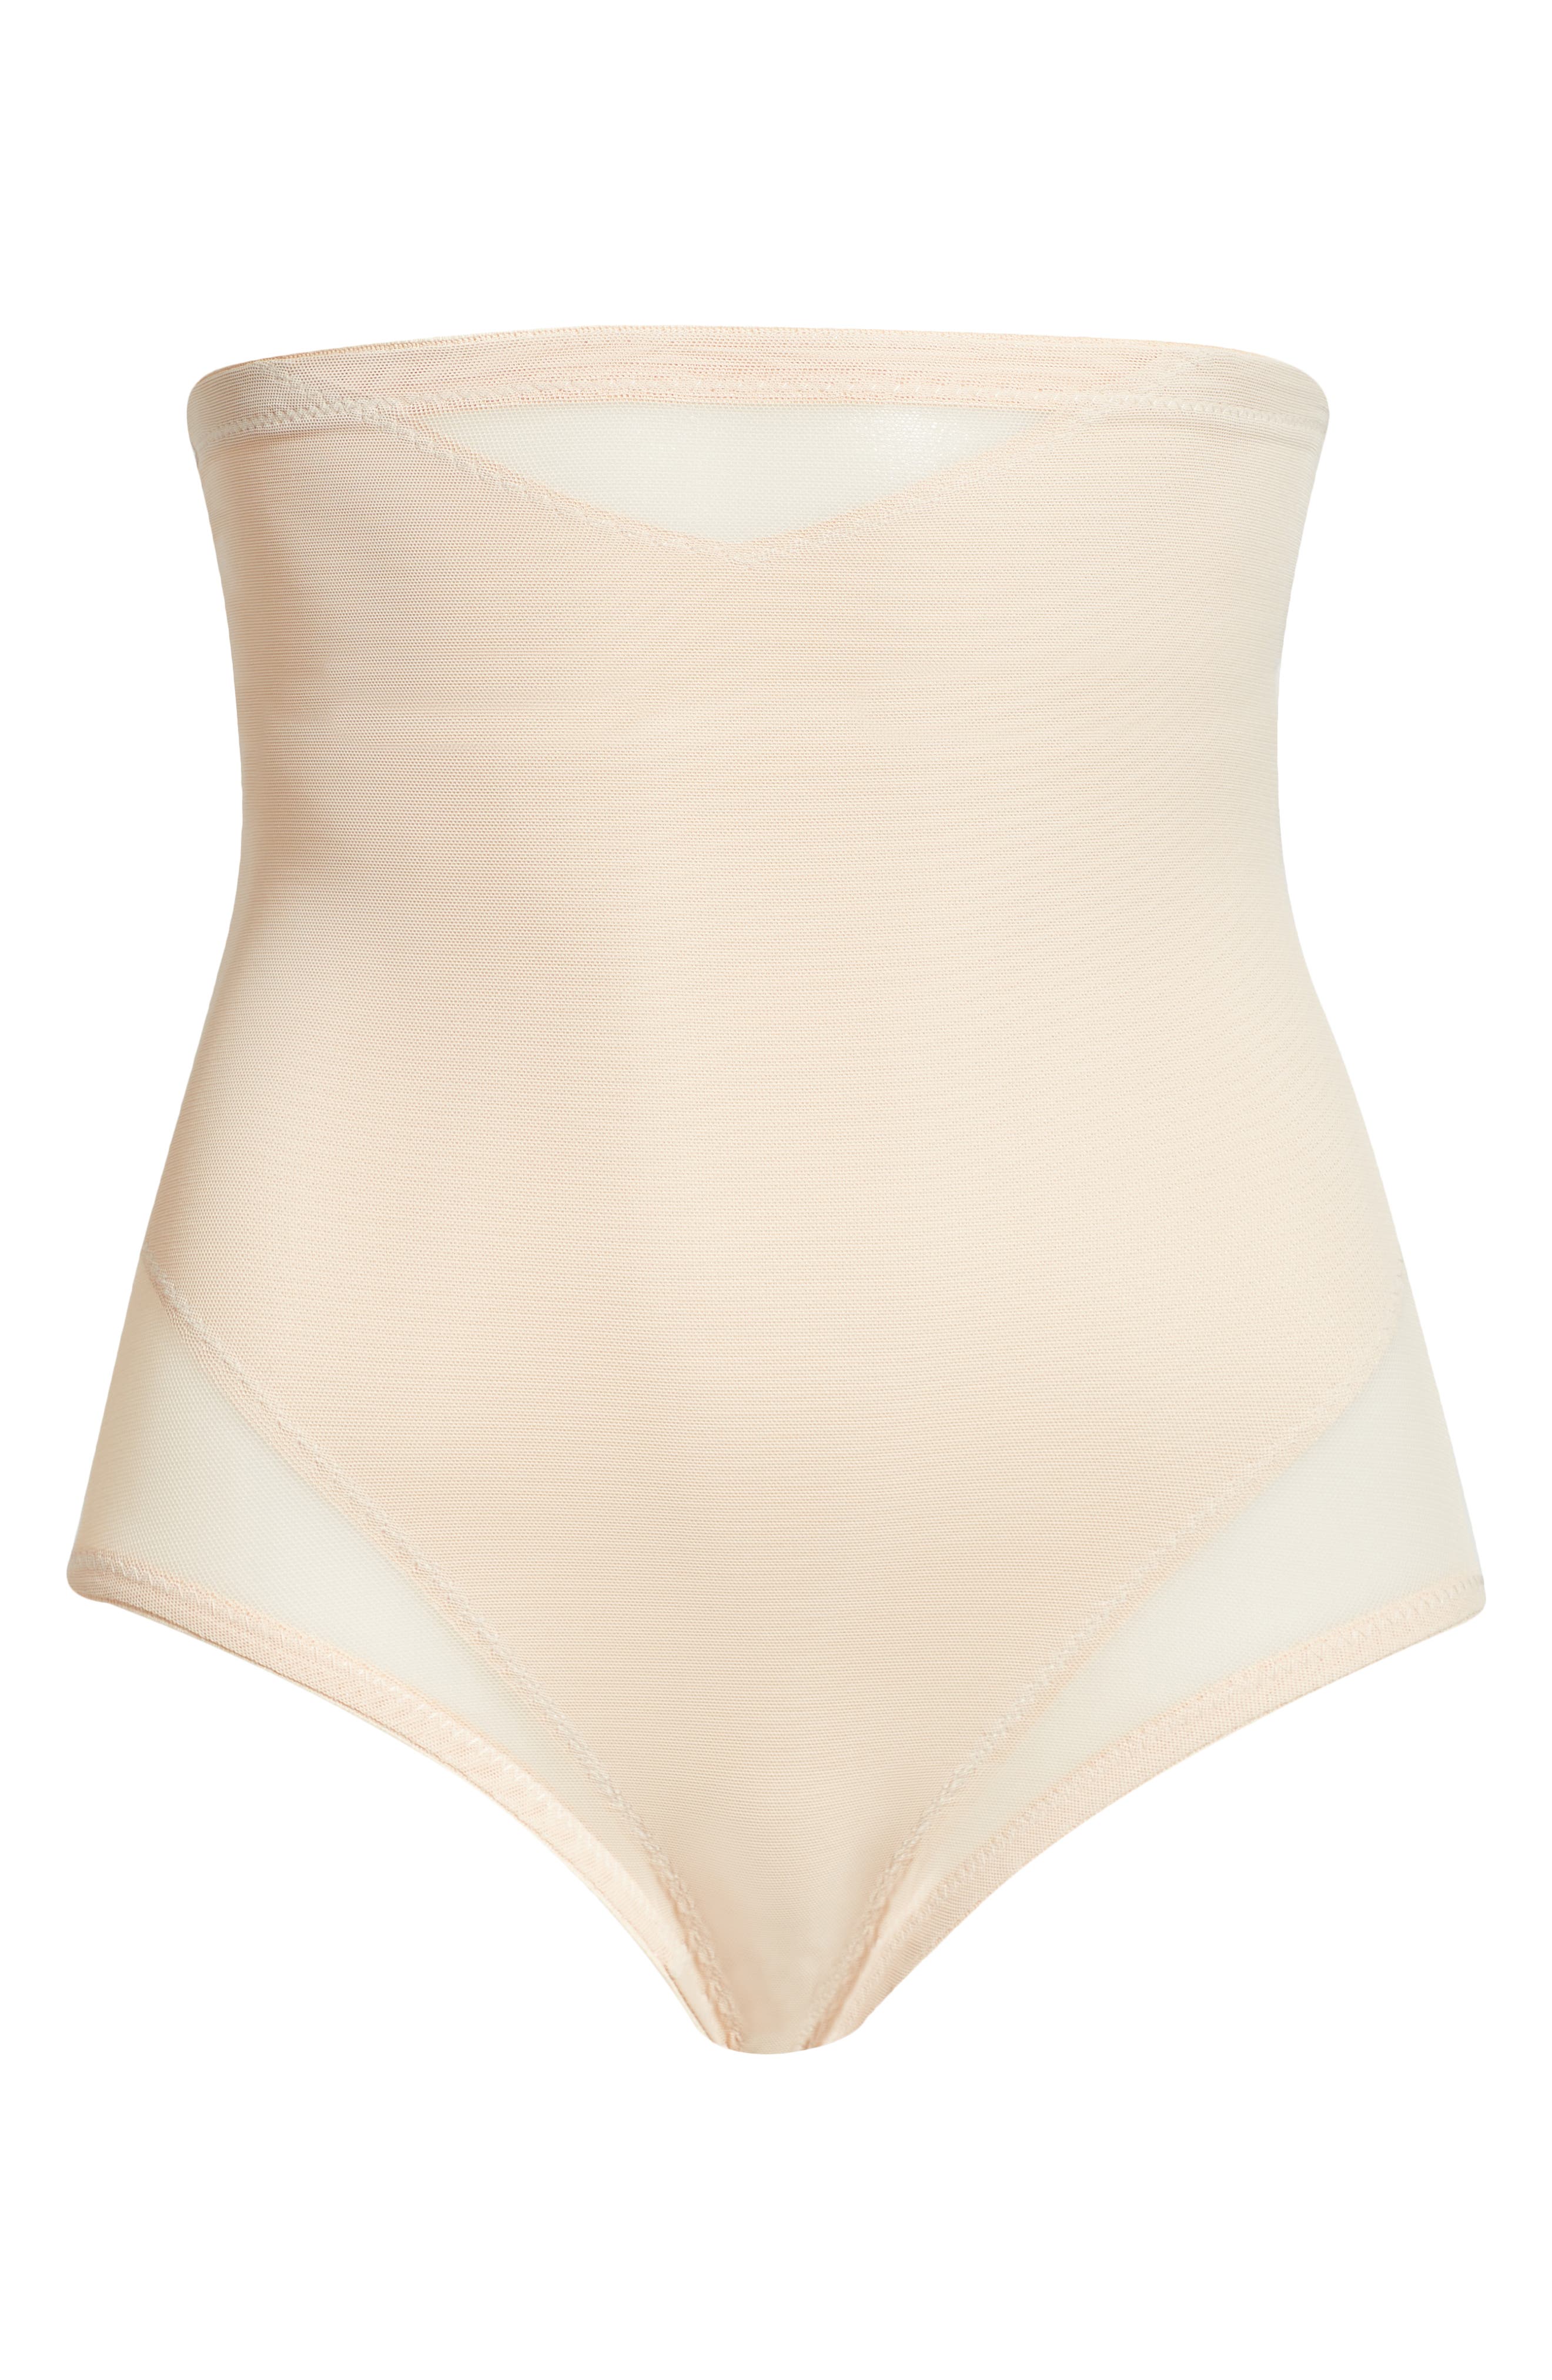 Miraclesuit Women's Extra Firm Tummy-control Sheer Trim Bodysuit